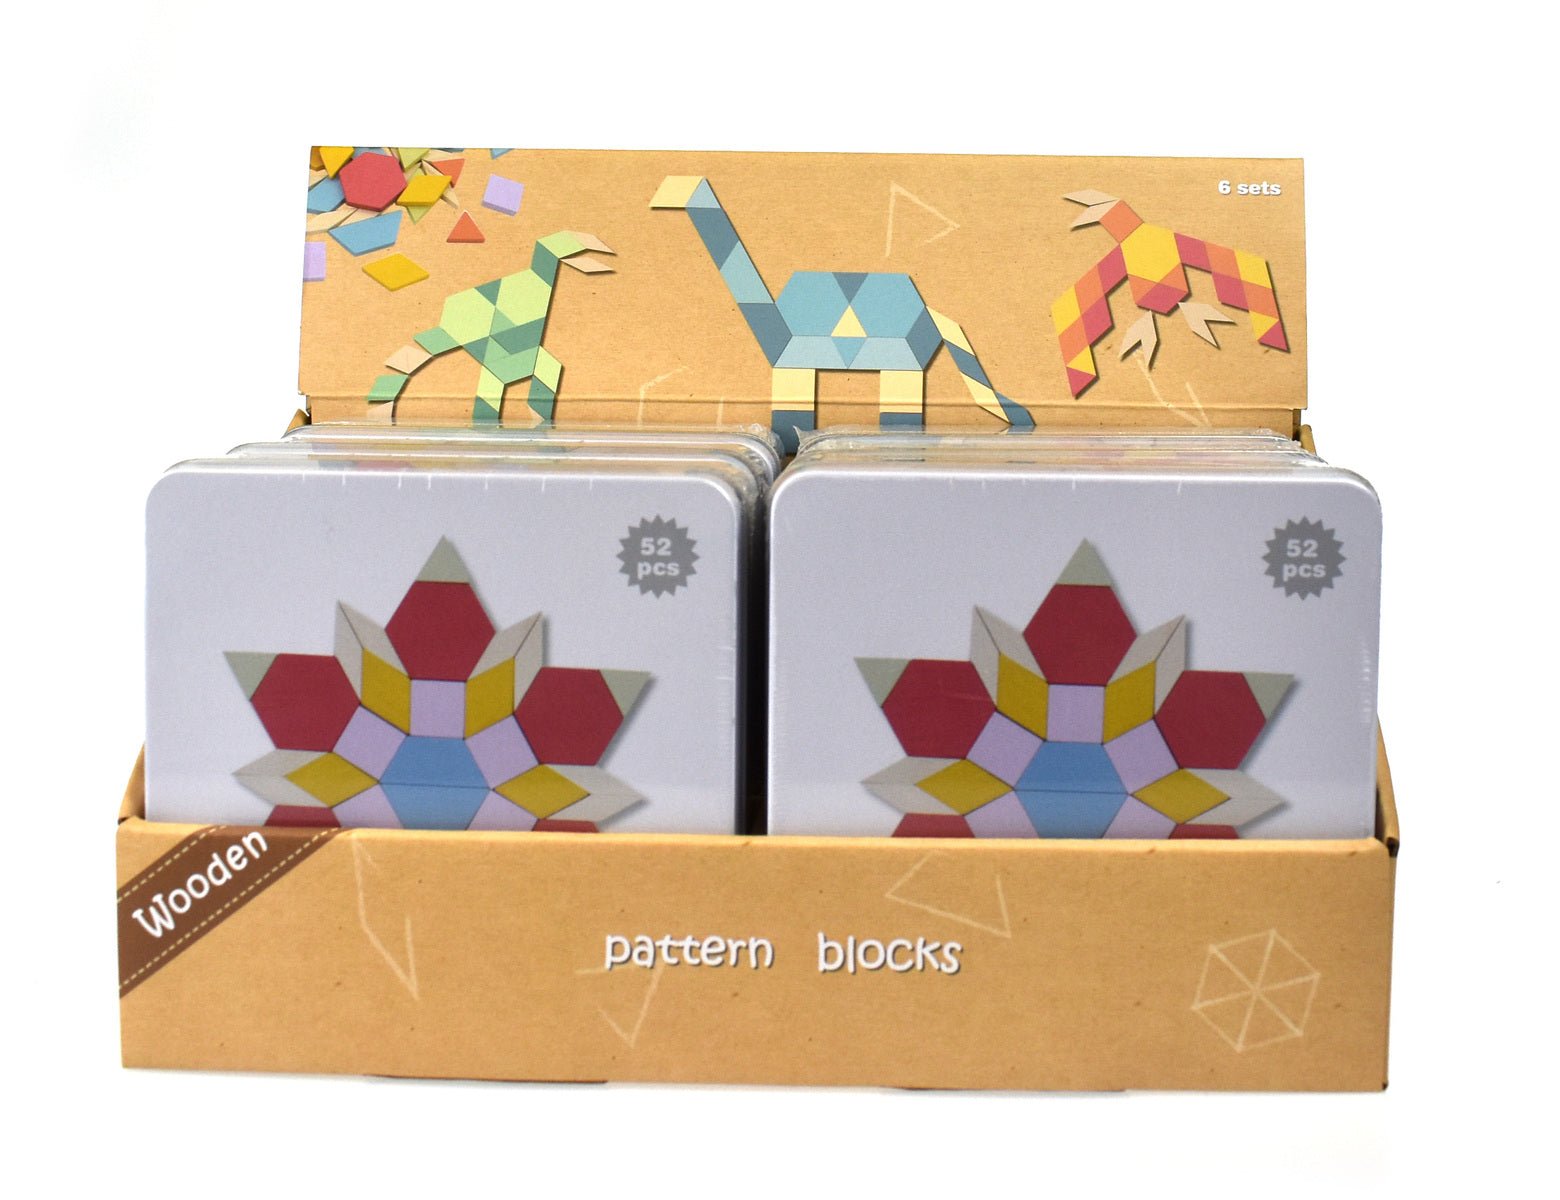 Calm and Breezy Pattern Blocks In Tin Box